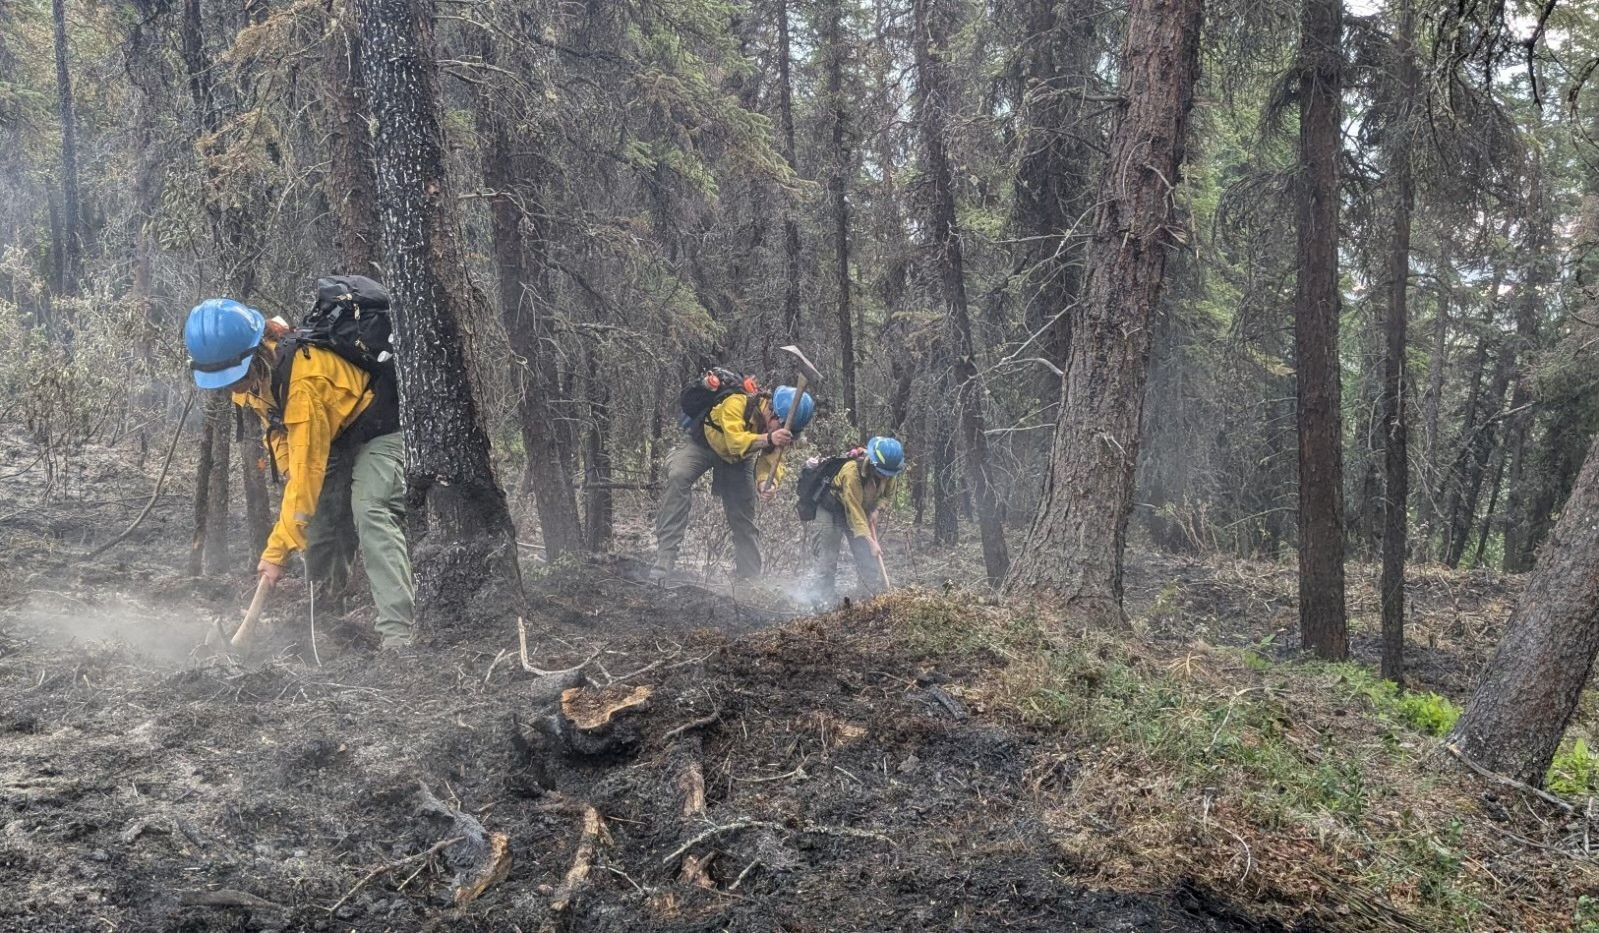 Three members of the wildland fire crew use tools on a smoking section of ground